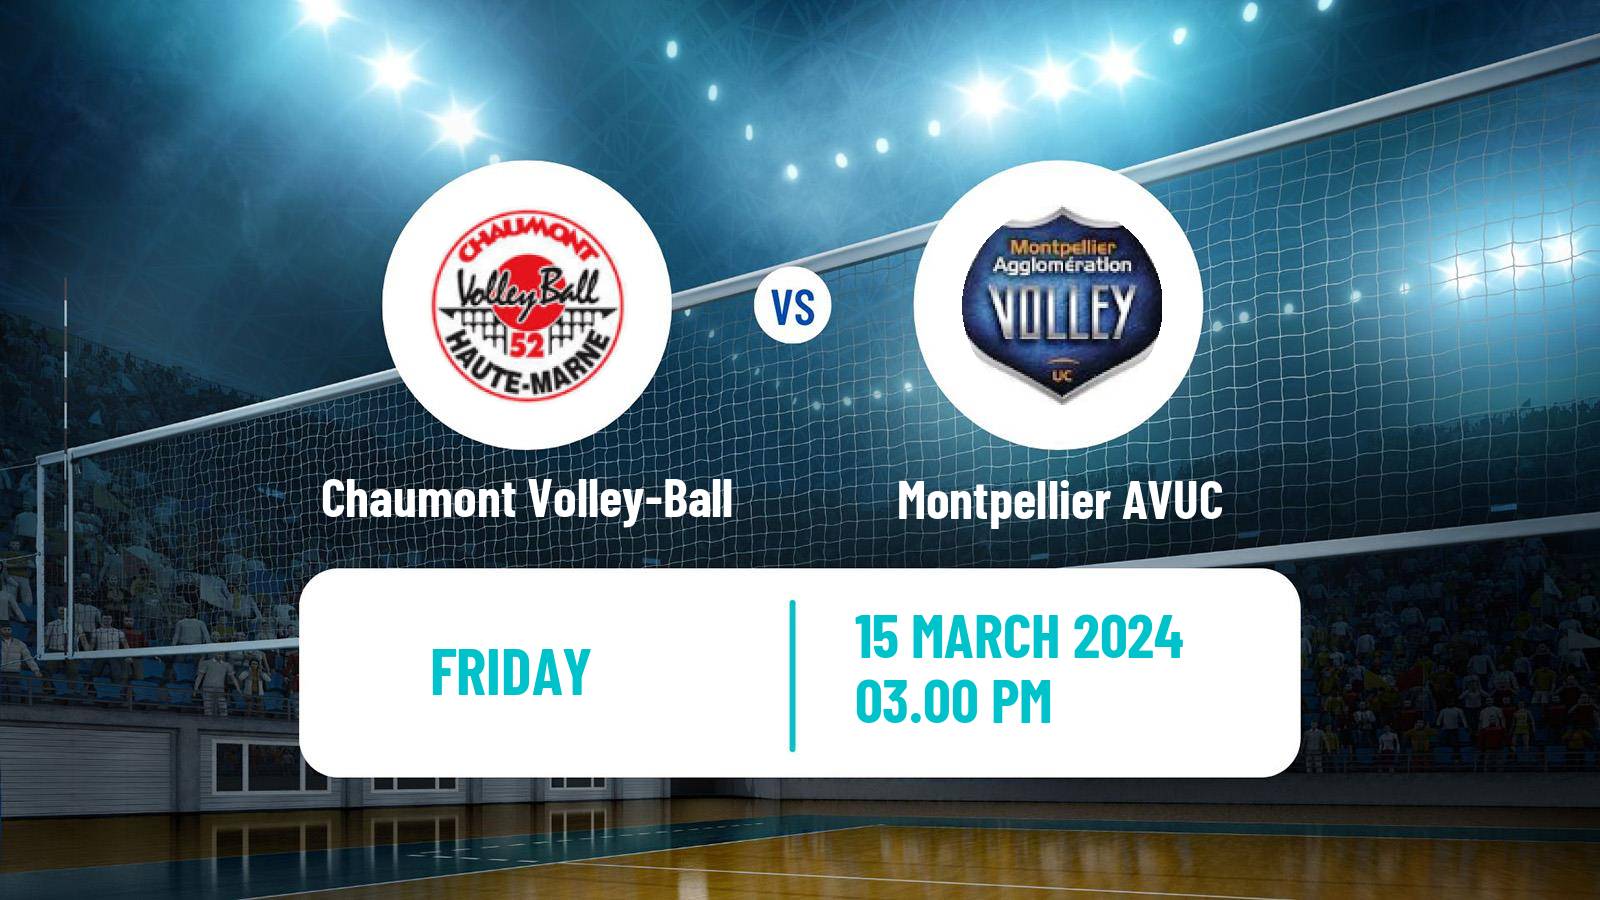 Volleyball French Ligue A Volleyball Chaumont Volley-Ball - Montpellier AVUC